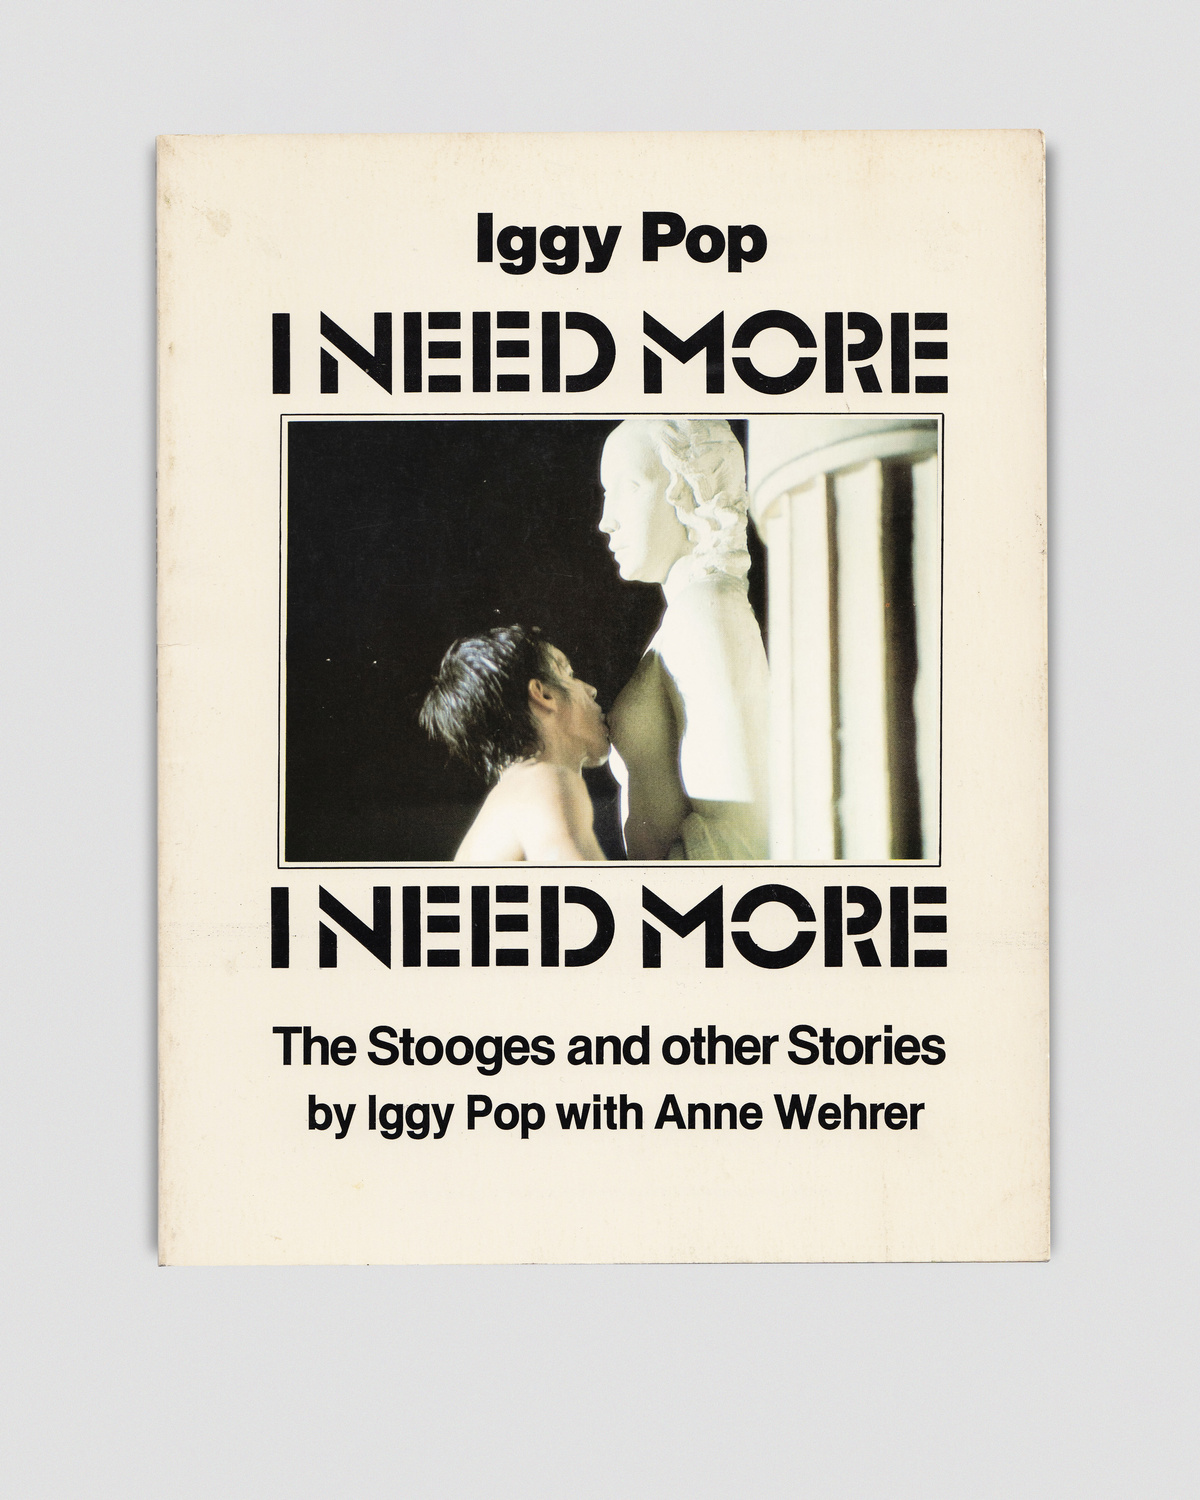 I NEED MORE ★ IGGY POP with Anne Wehrer